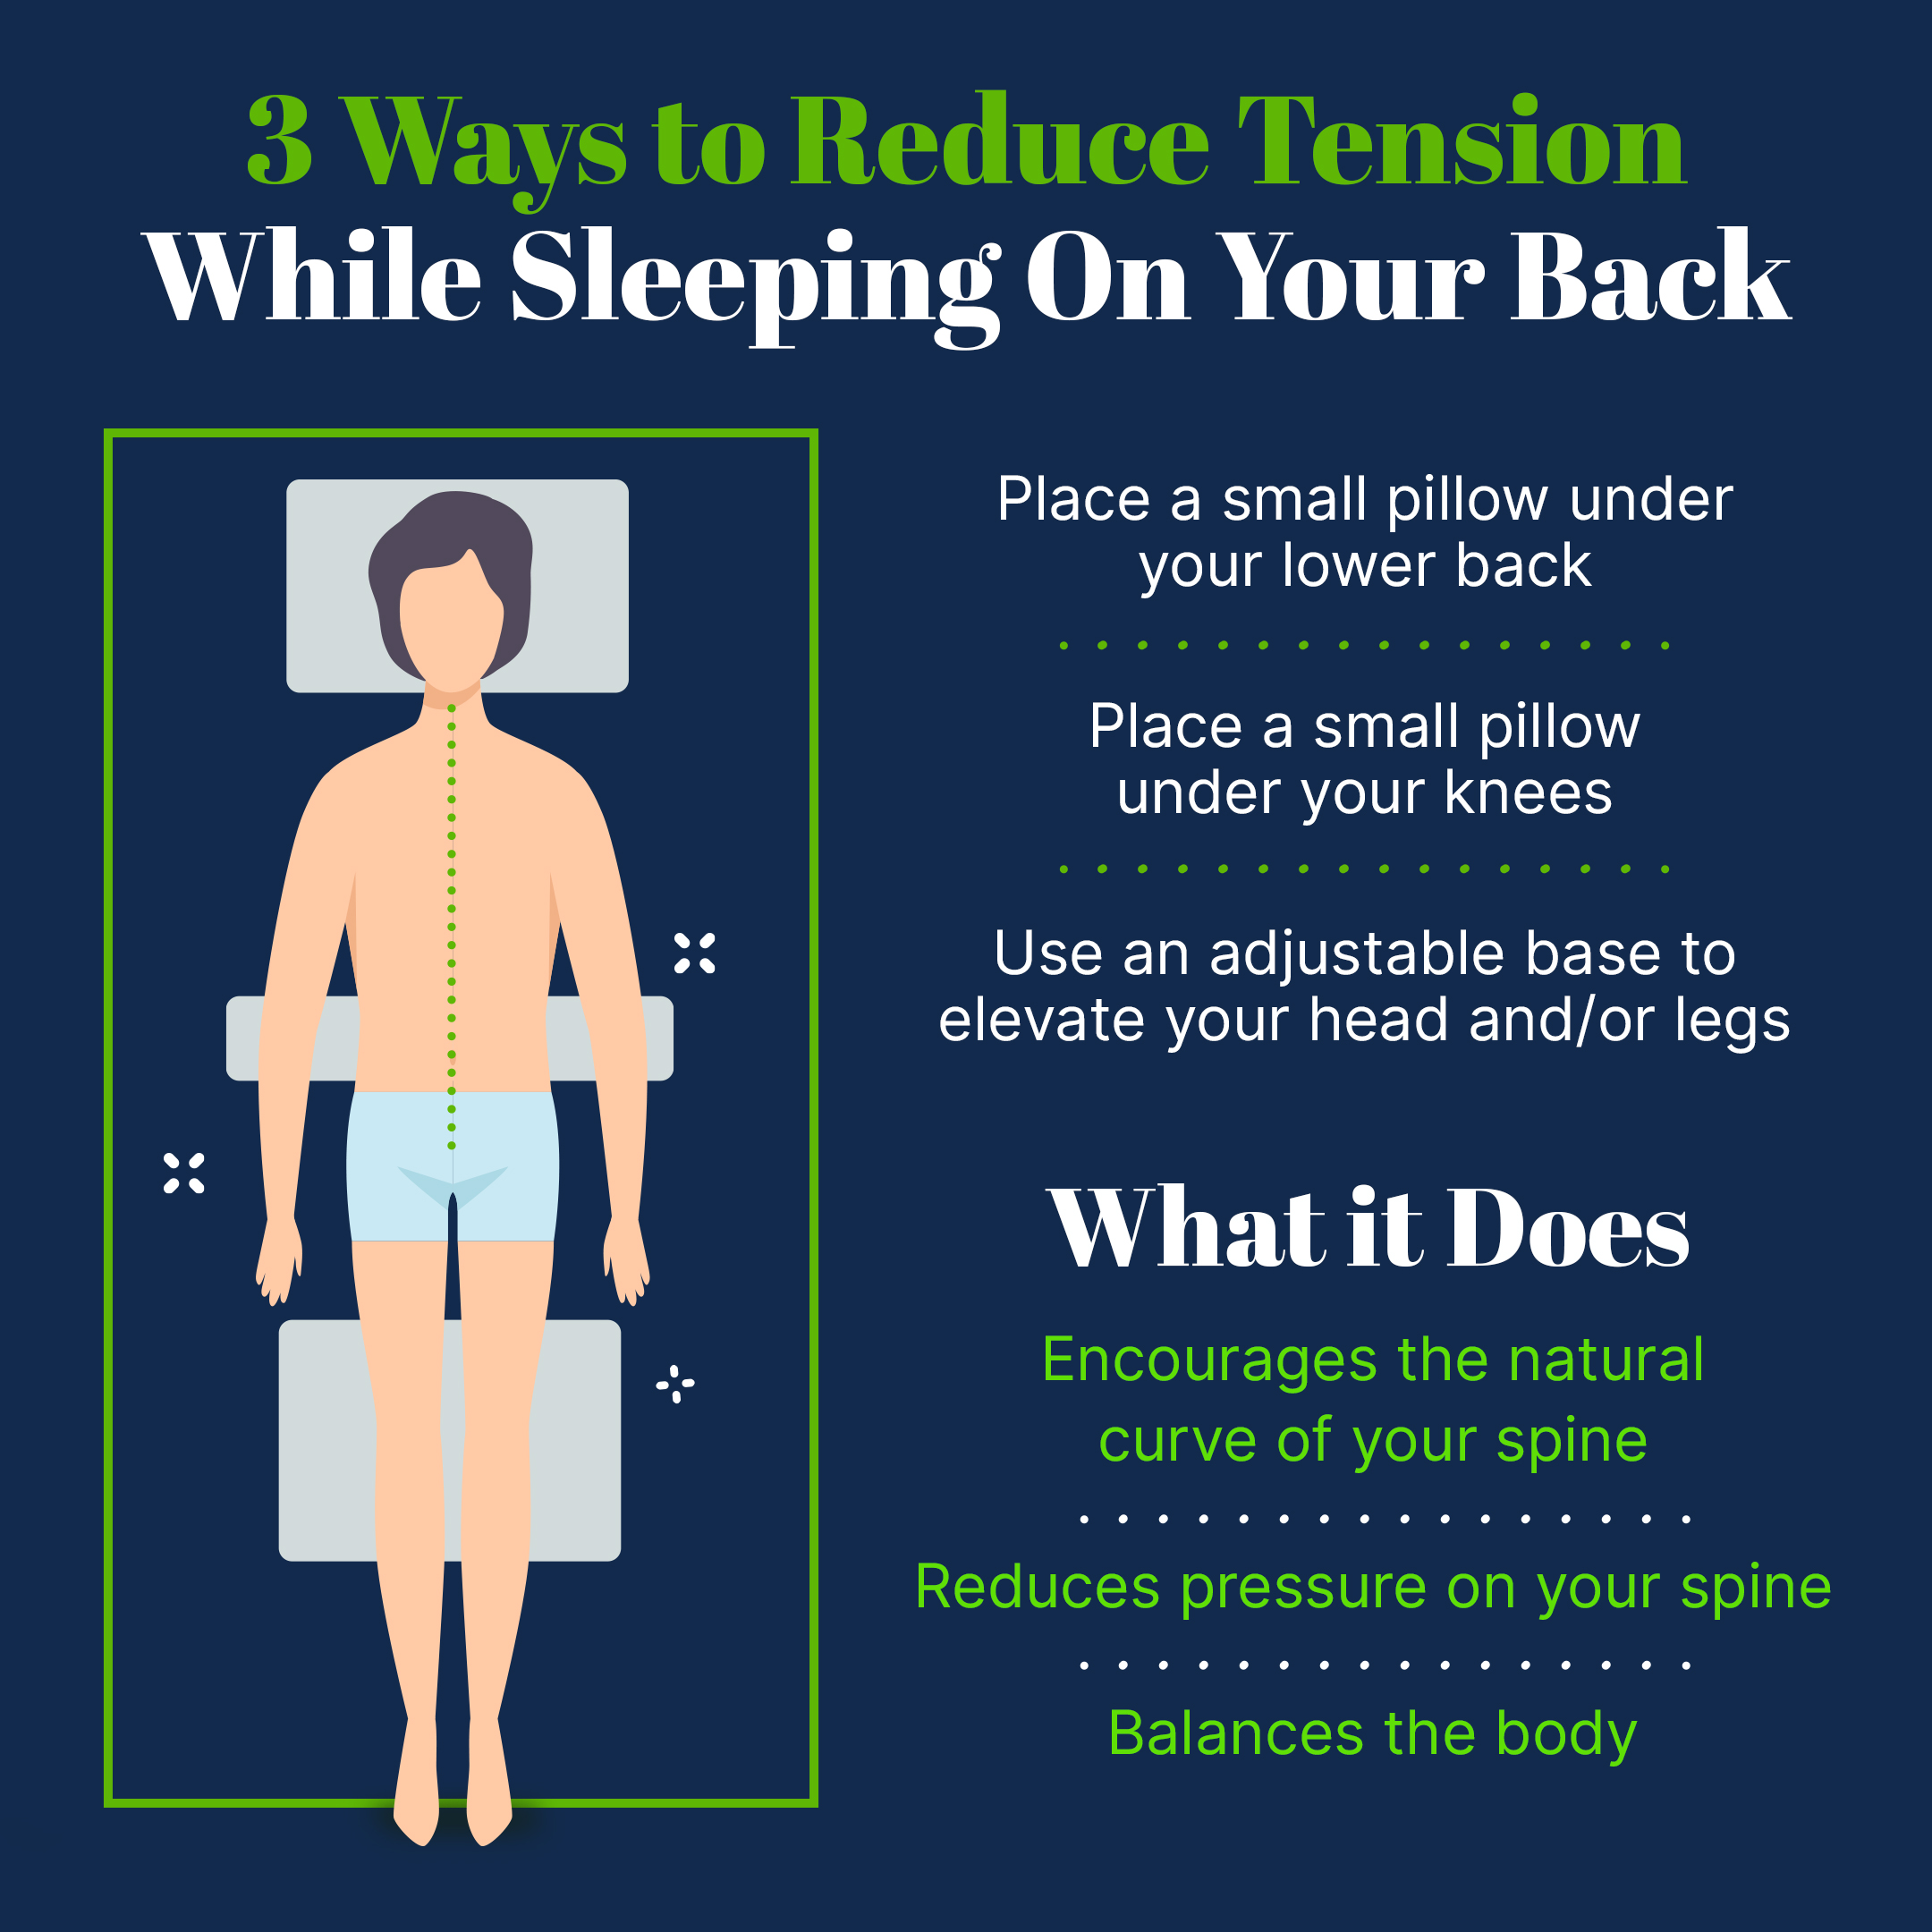 Reduce tension while sleeping on your back with pillows and/or an adjustable base